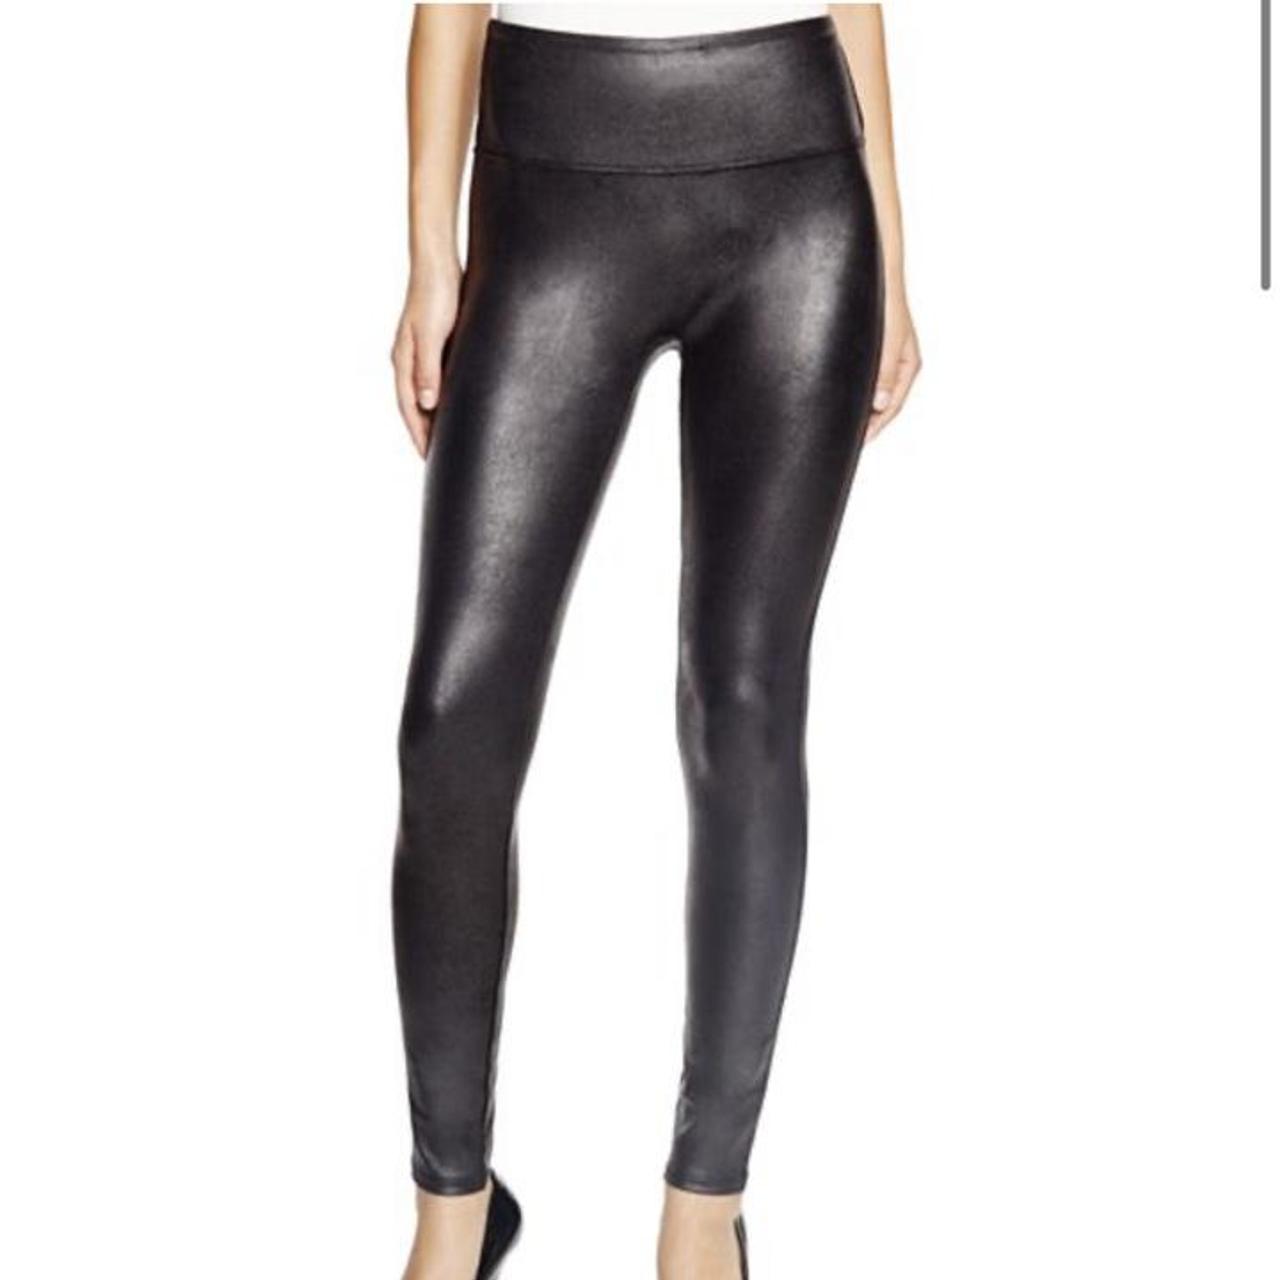 Product Image 1 - NWOT Spanx Faux-Leather Leggings

Features a